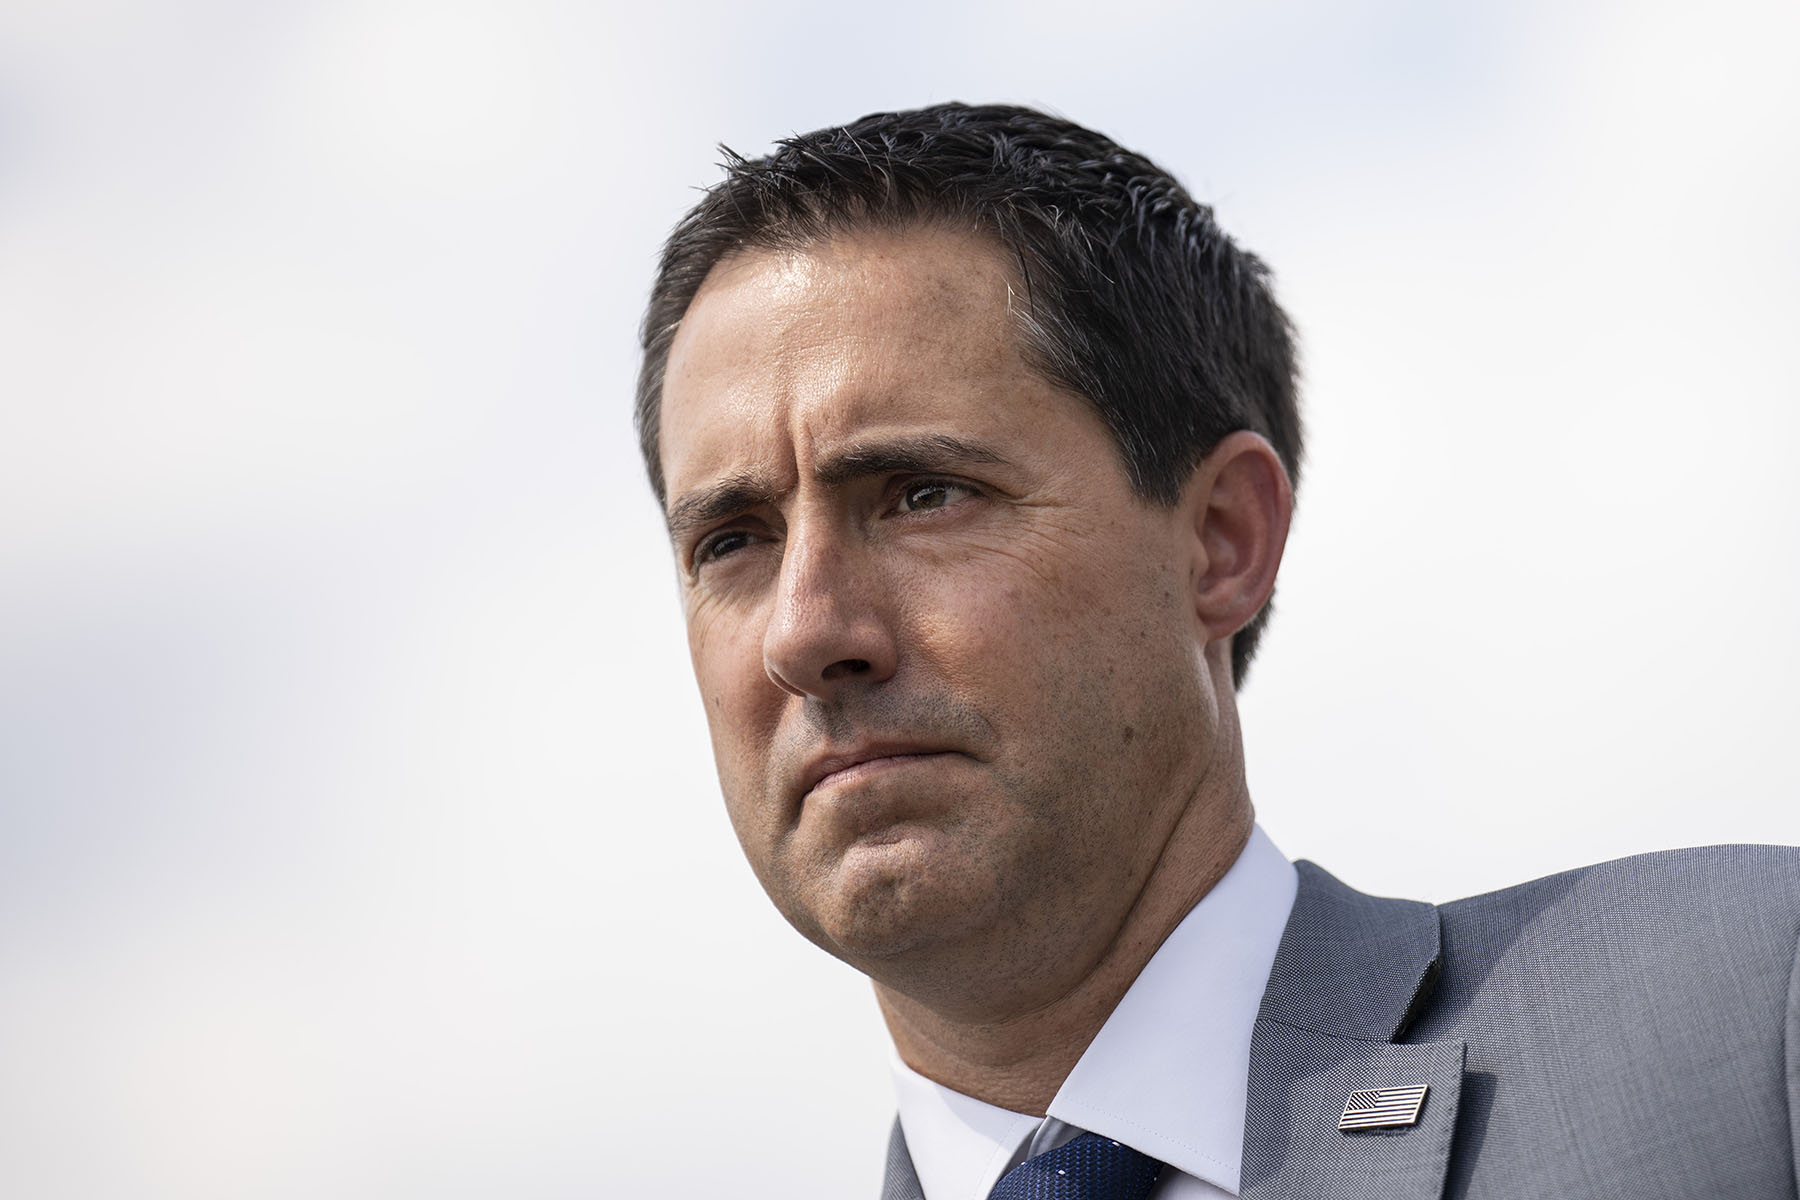 Ohio Secretary Frank LaRose attends a news conference at the U.S. Capitol.